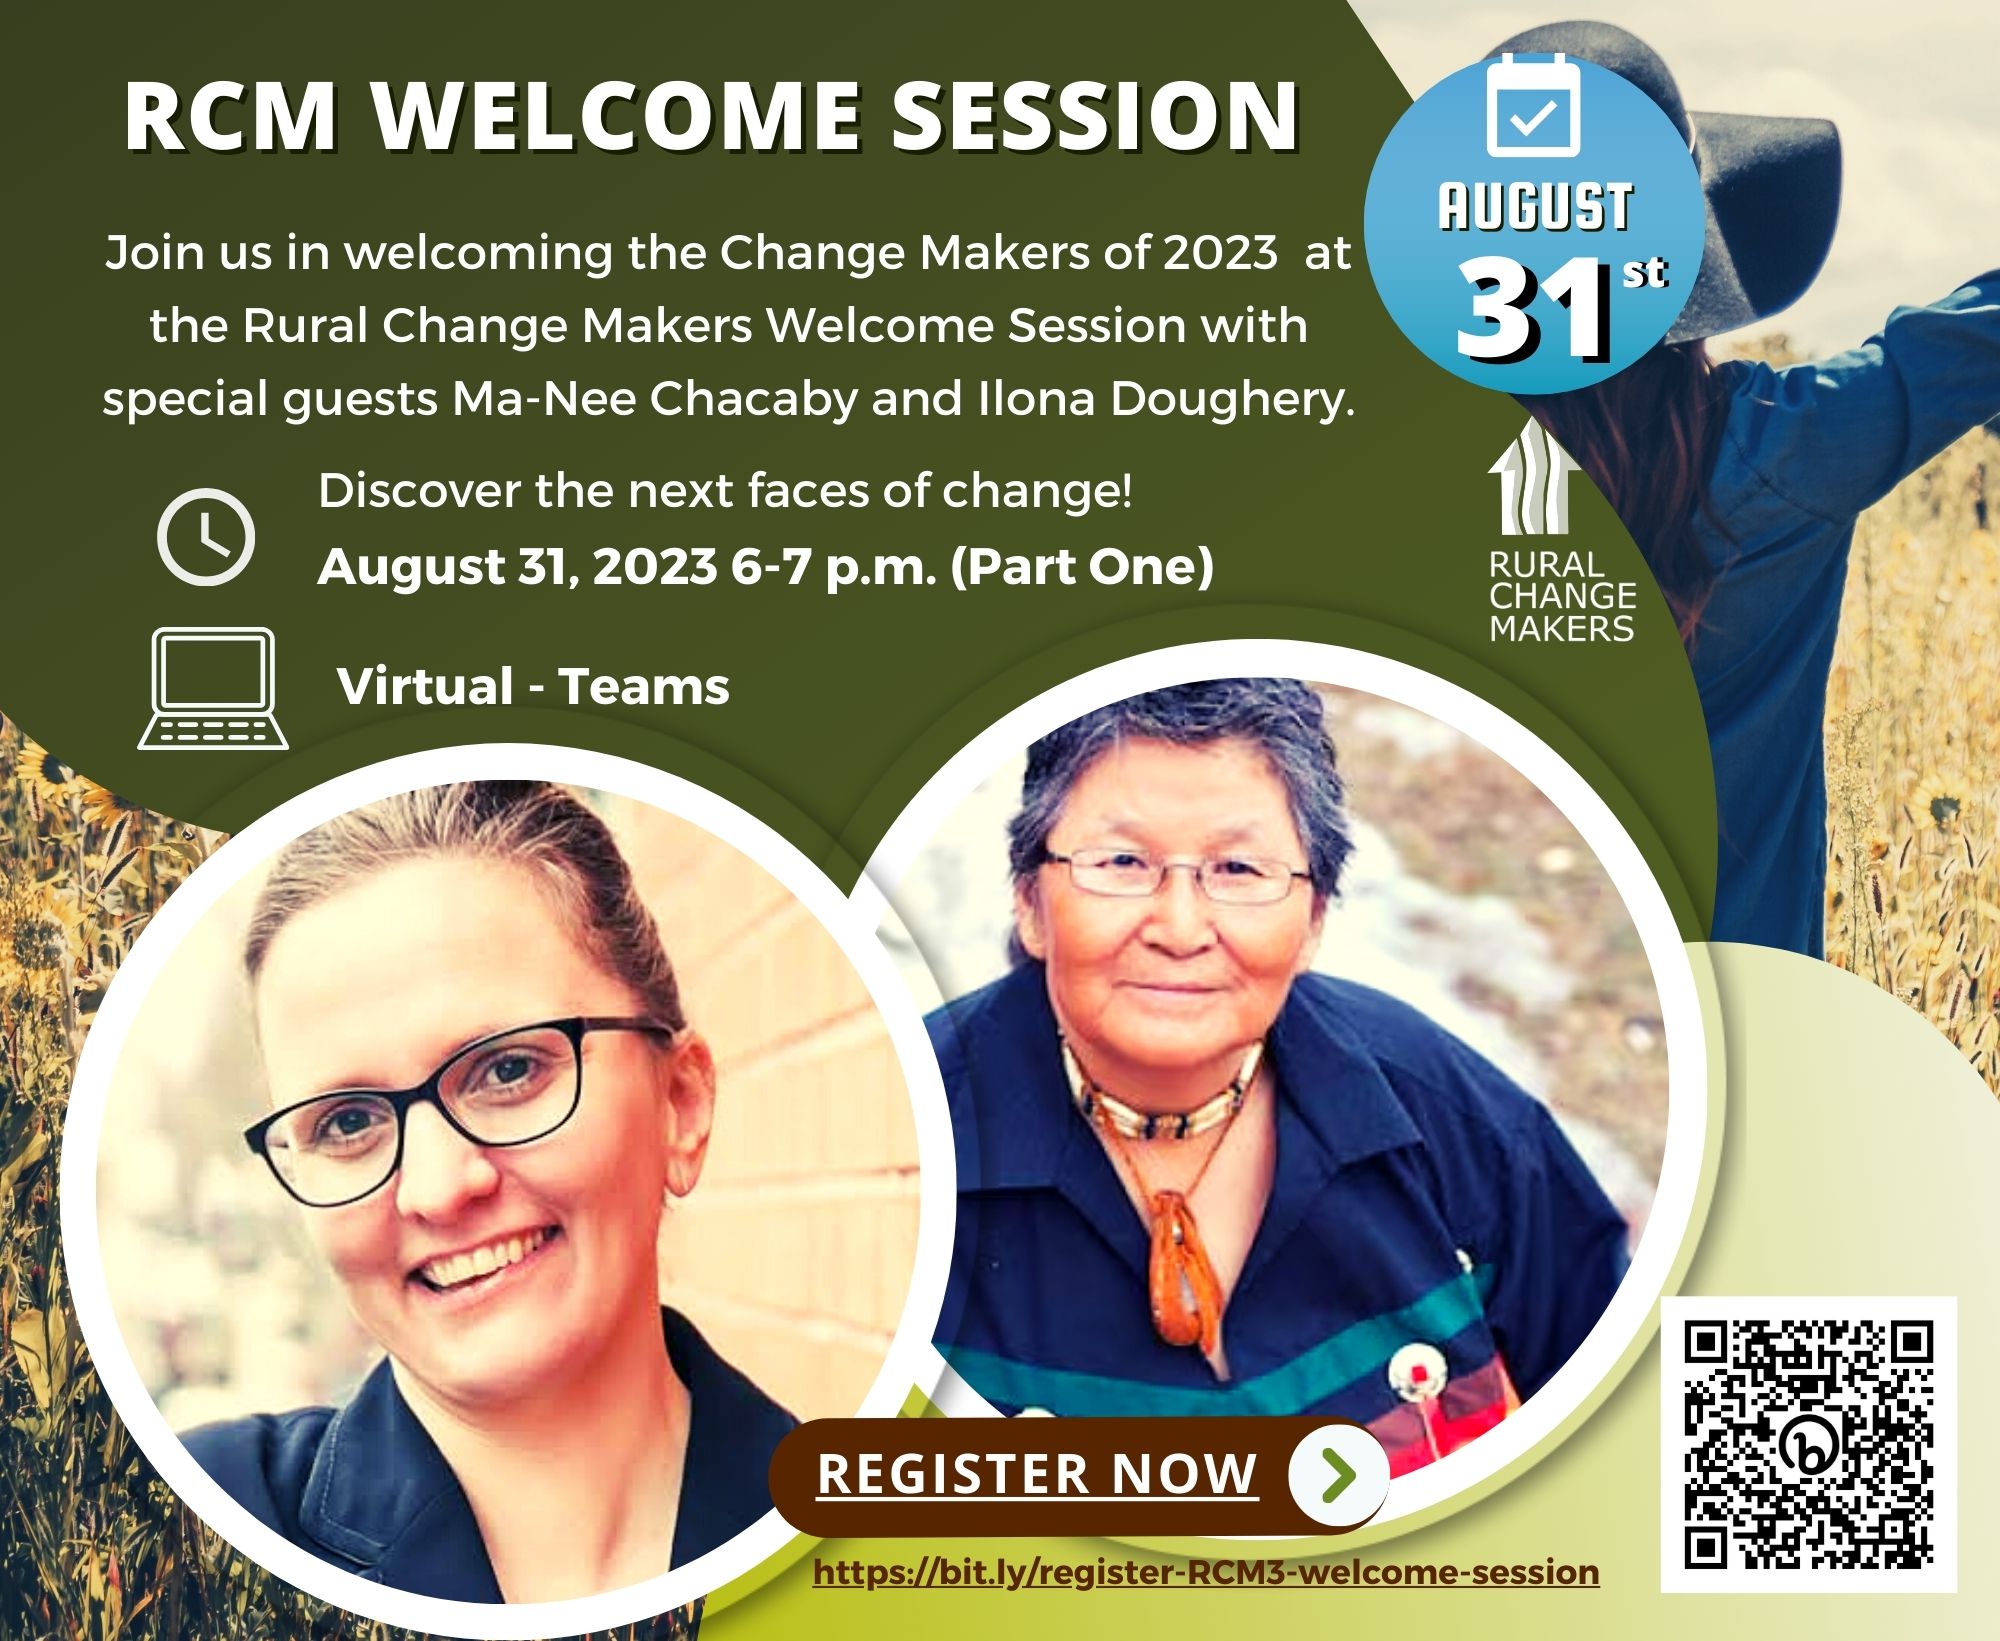 Join us in welcoming the 2023 change makers of rural Ontario August 31, 2023 from 6-7 p.m. To register visit: https://bit.ly/register-RCM3-welcome-session